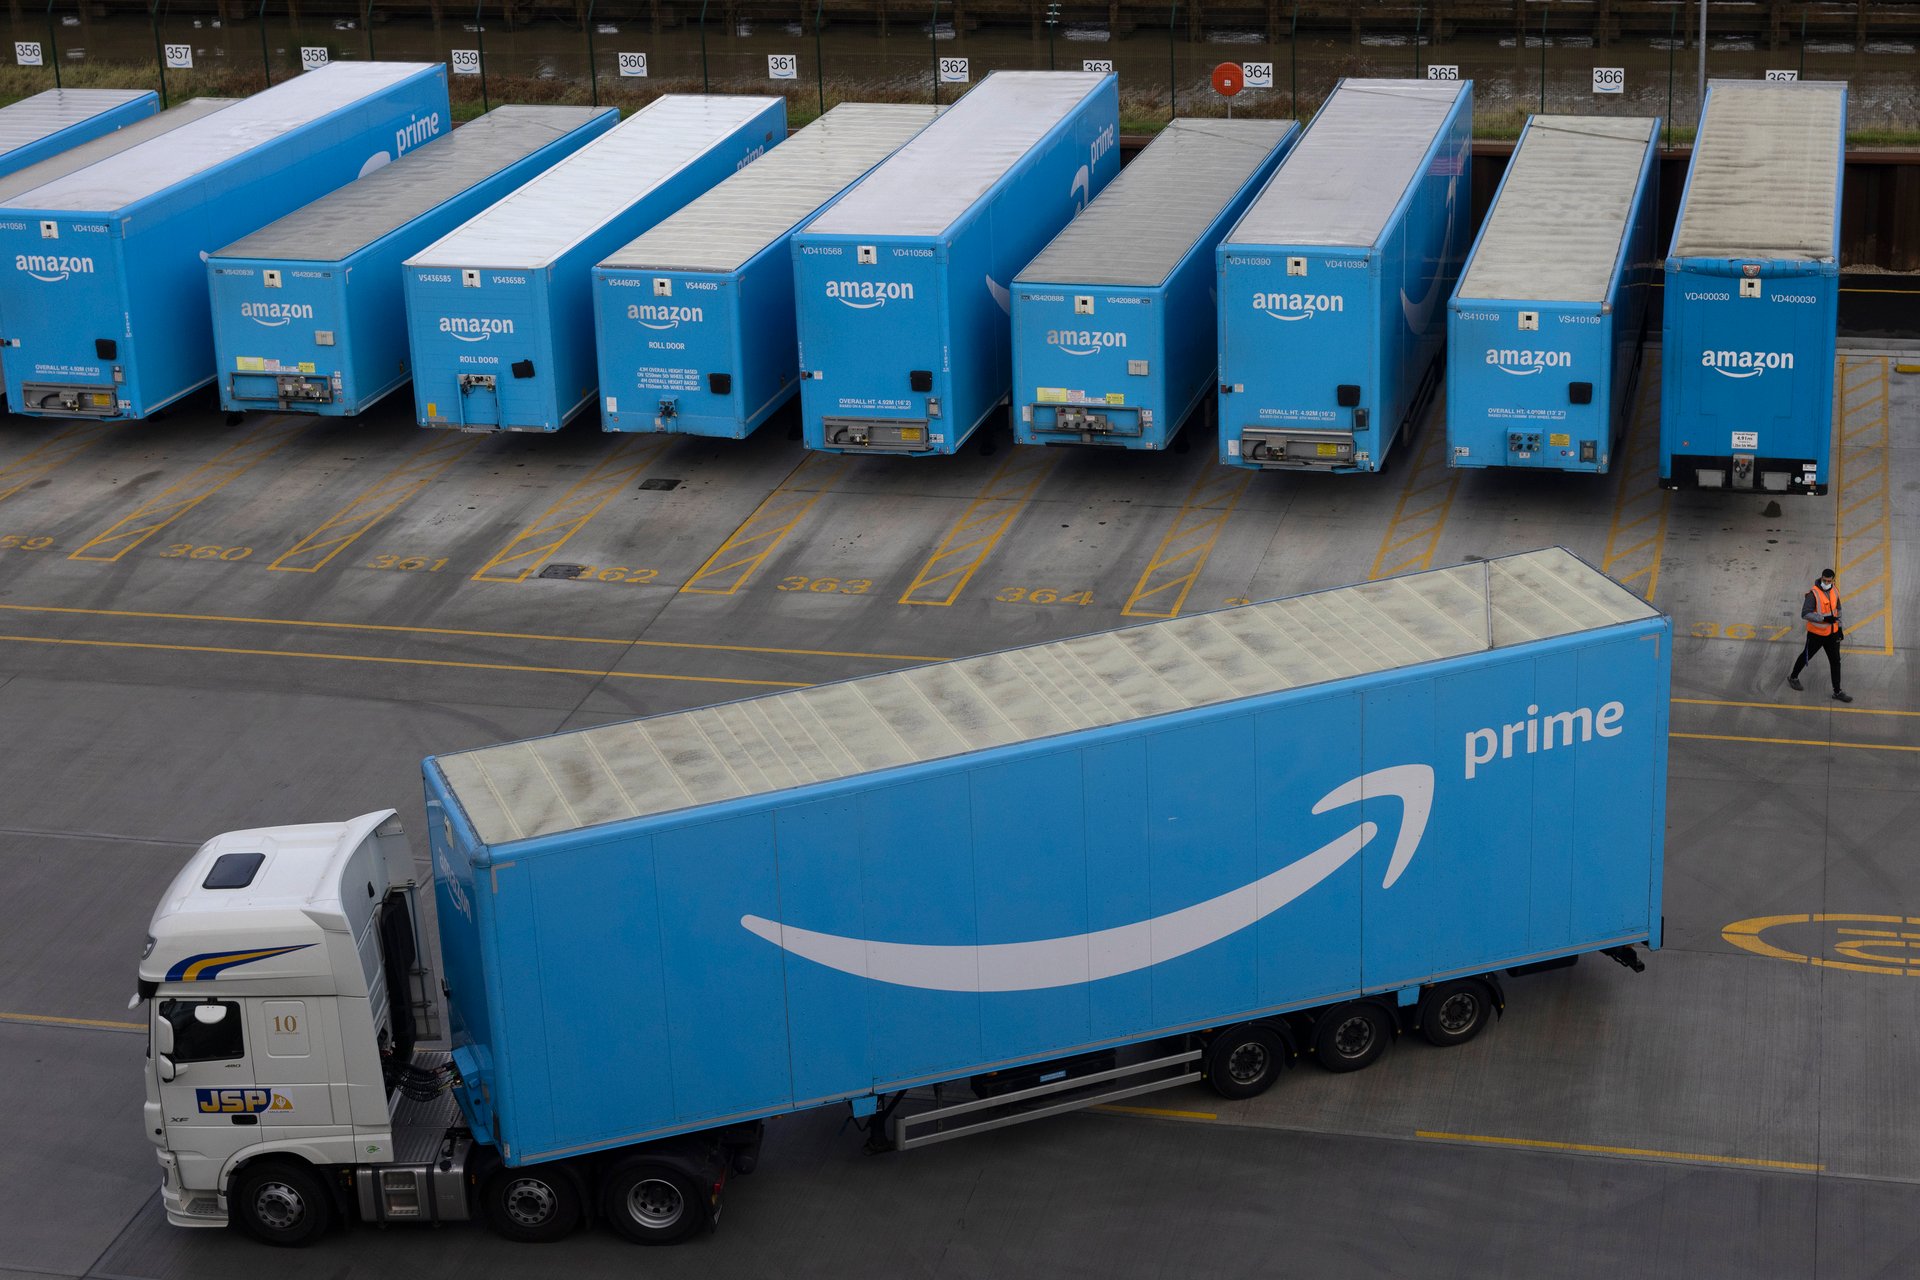  Amazon Prime lorries are seen at the Amazon fulfilment centre with one driving away.